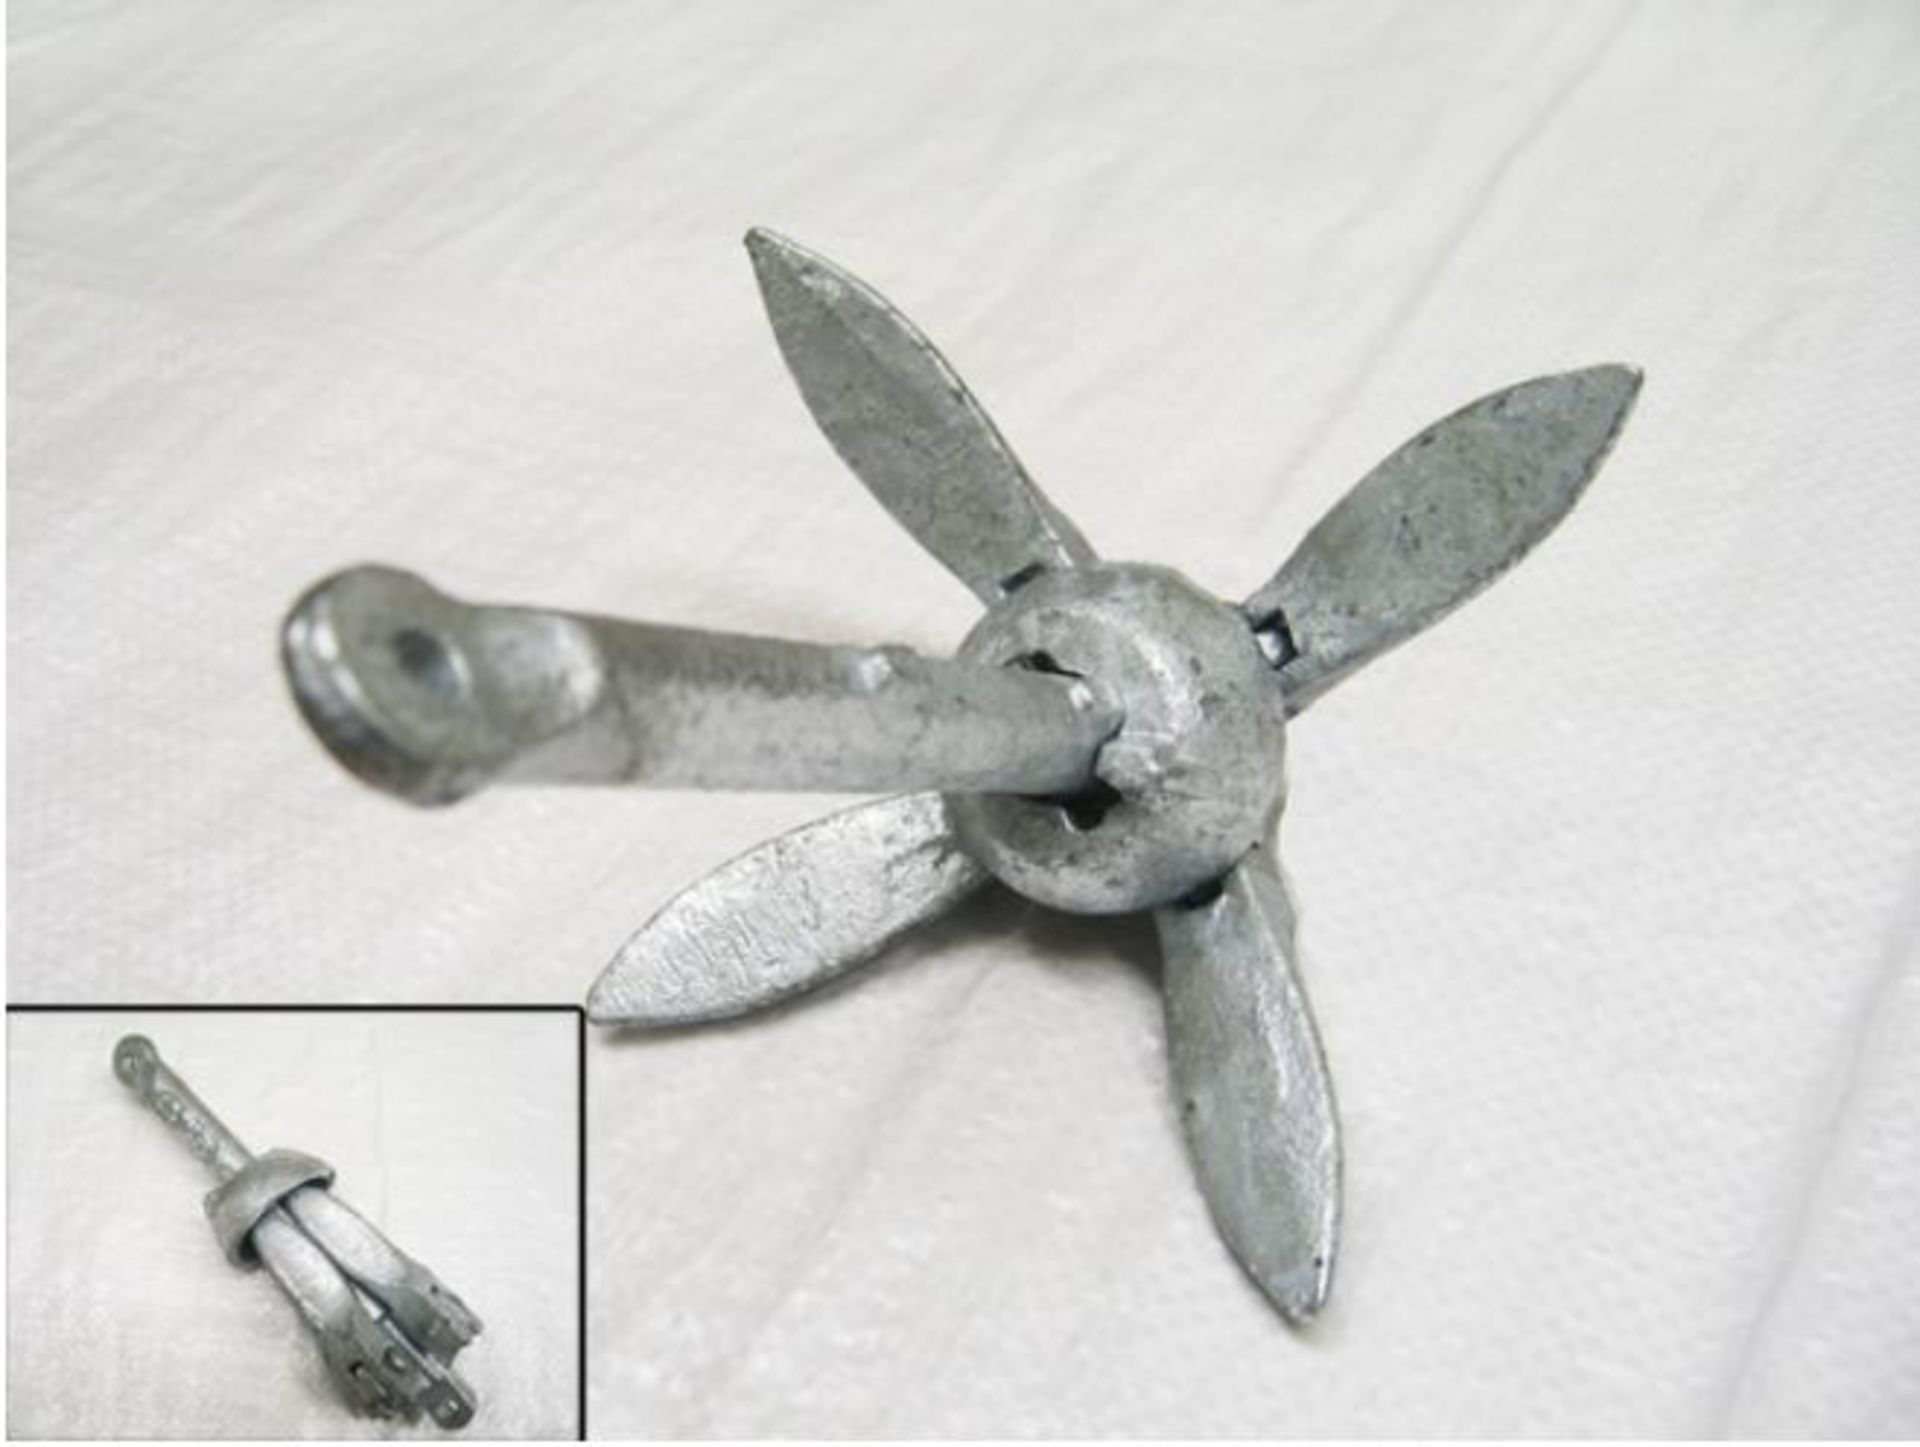 2 x 0.7 kg galvanised folding anchor (anf0.7)